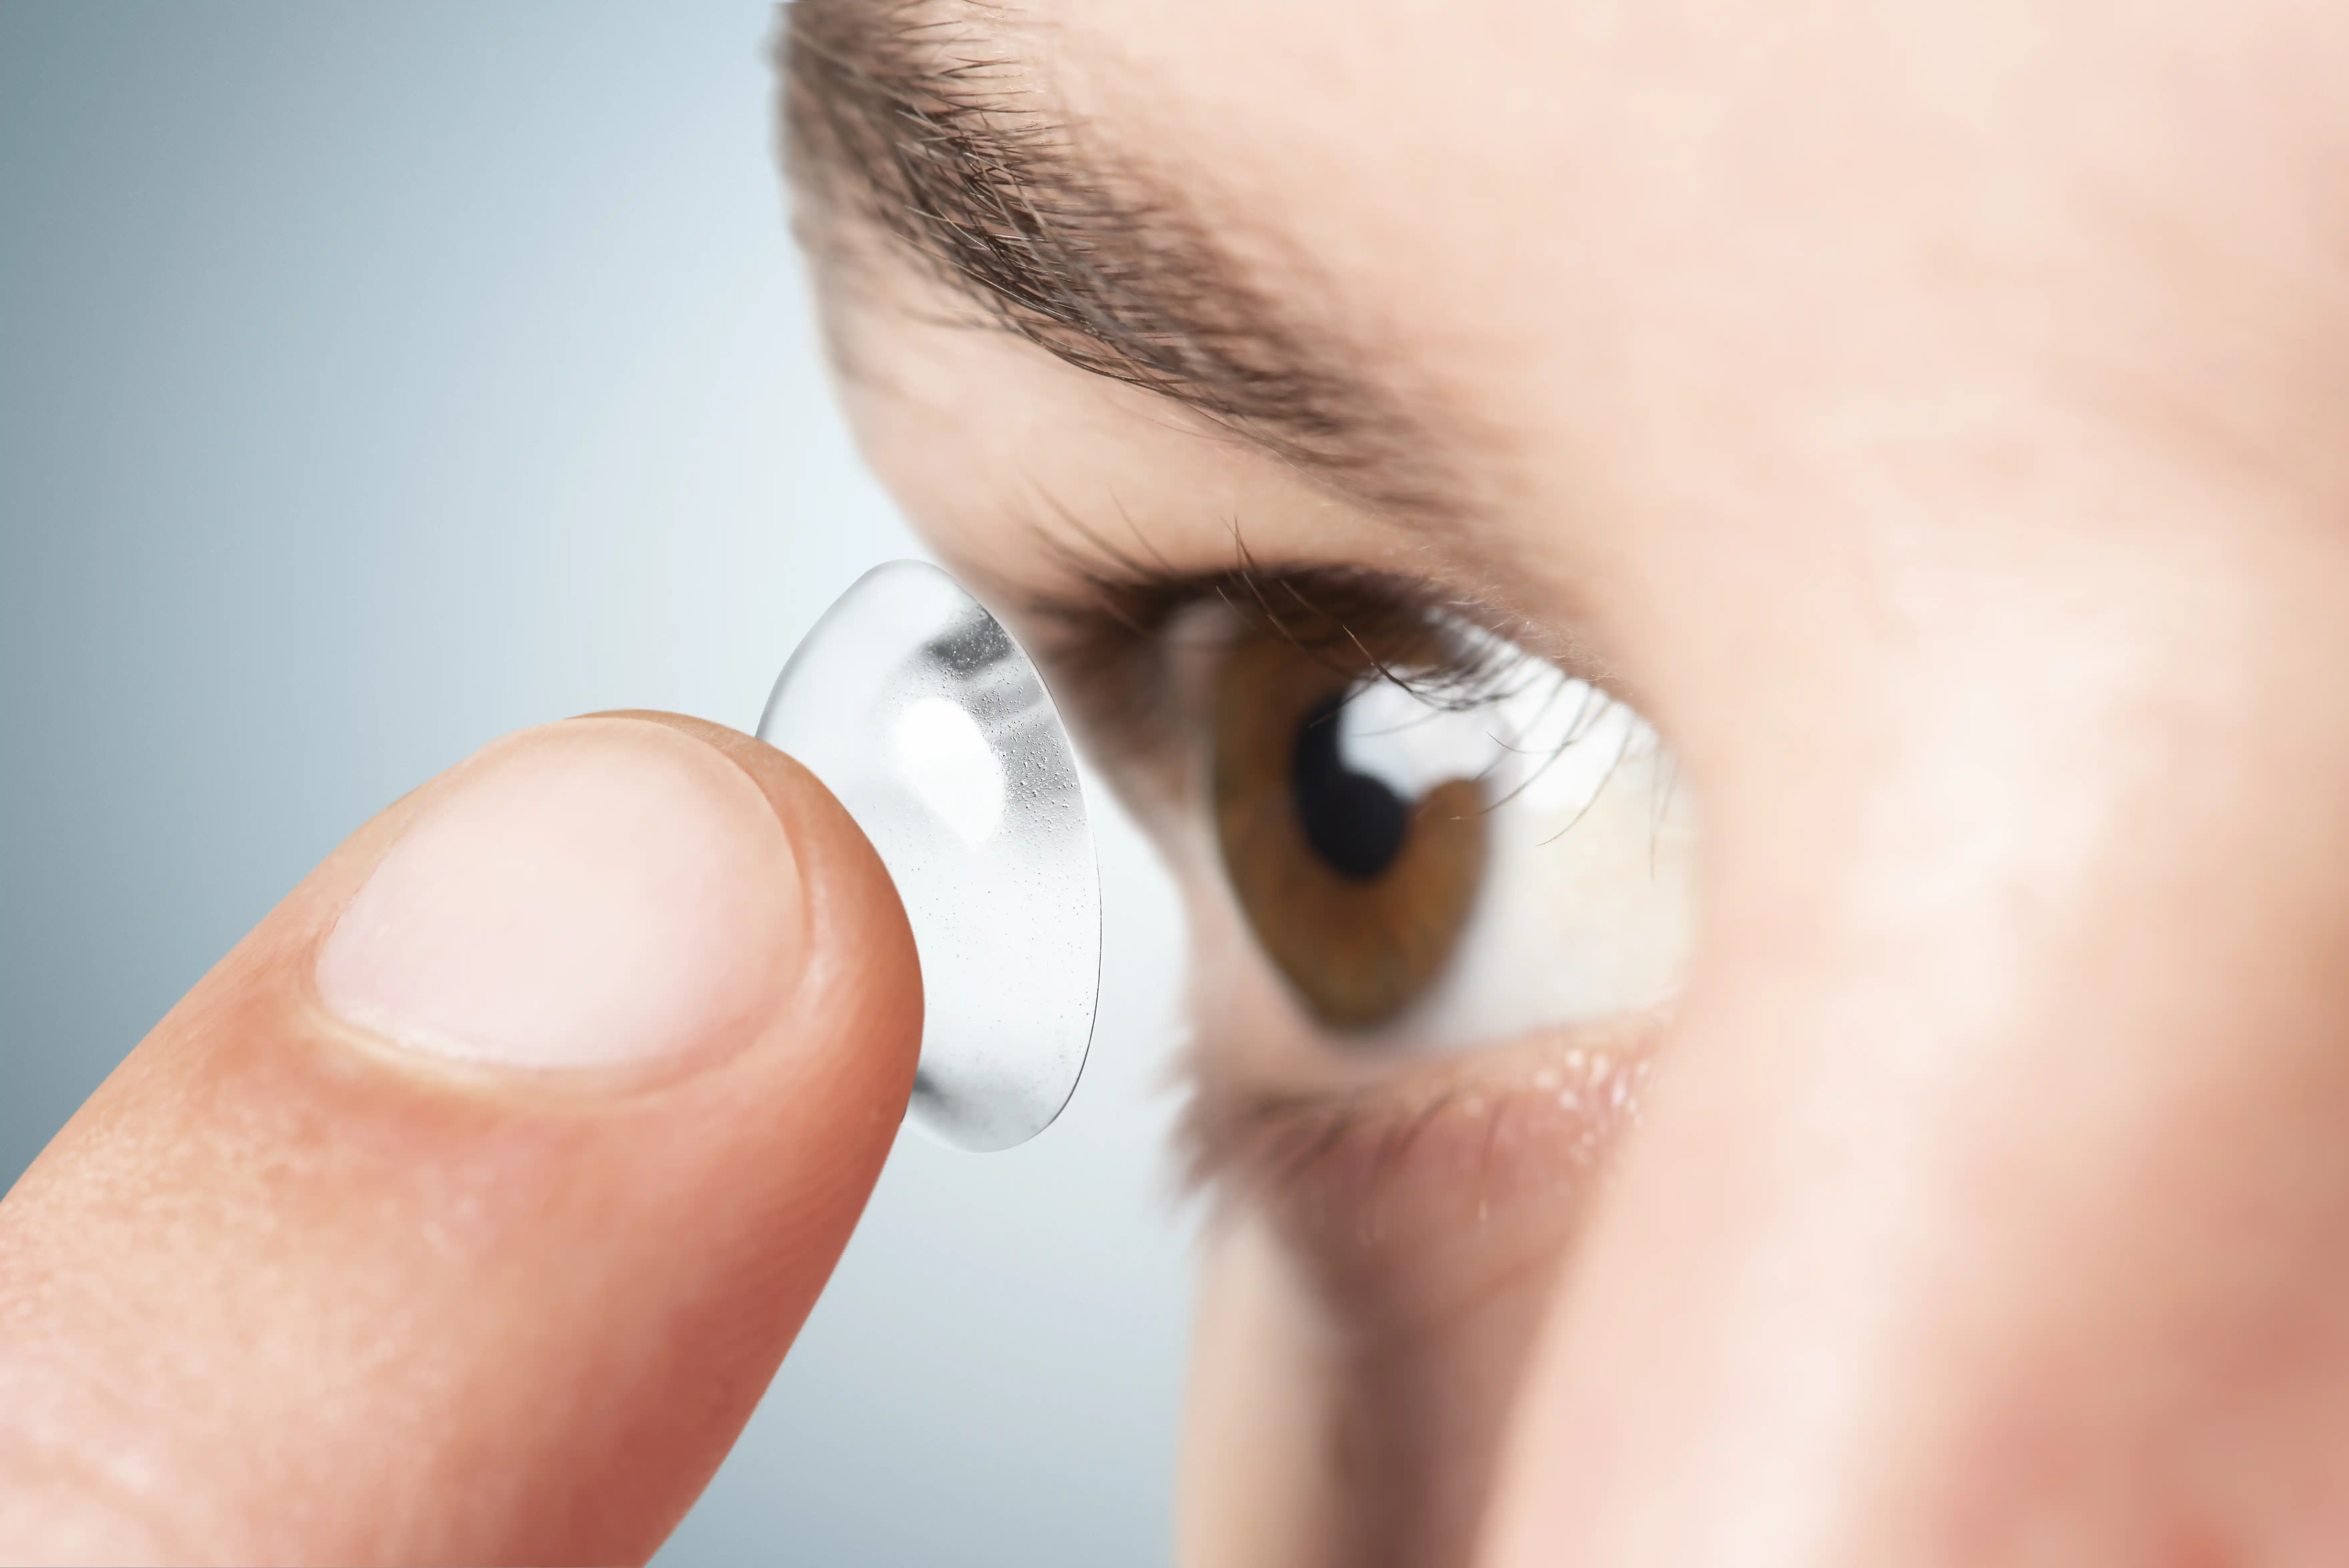 Tips for First-Time Contact Lens Wearers: Do’s and Don’ts